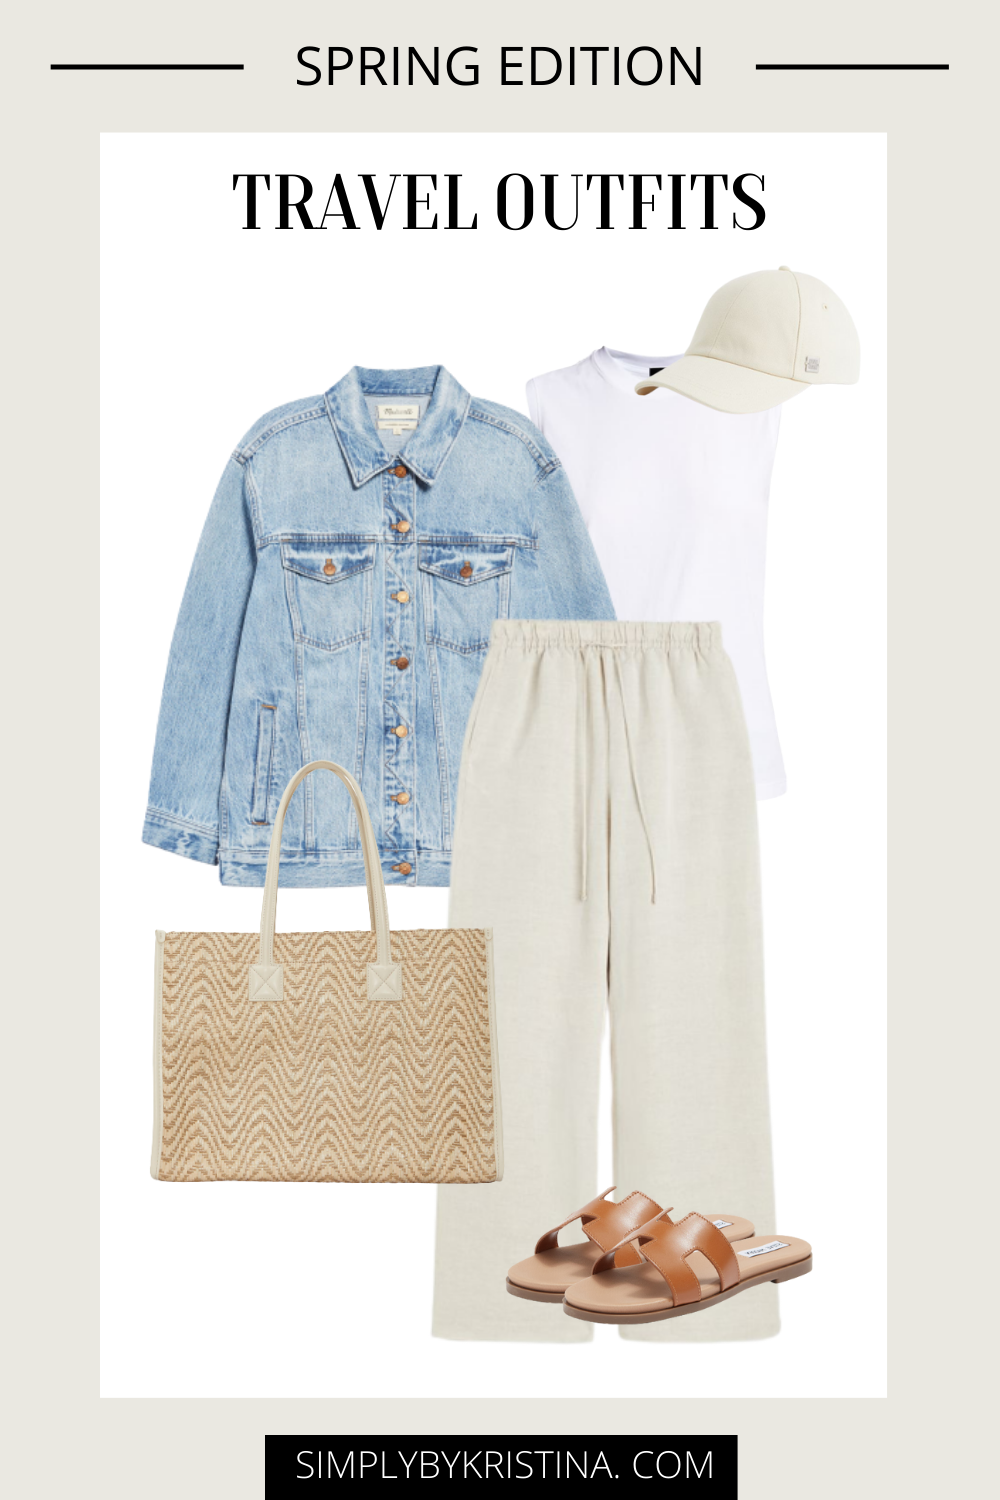 Neutral Aesthetic Midsize Travel Outfit - Chic Fashion Style